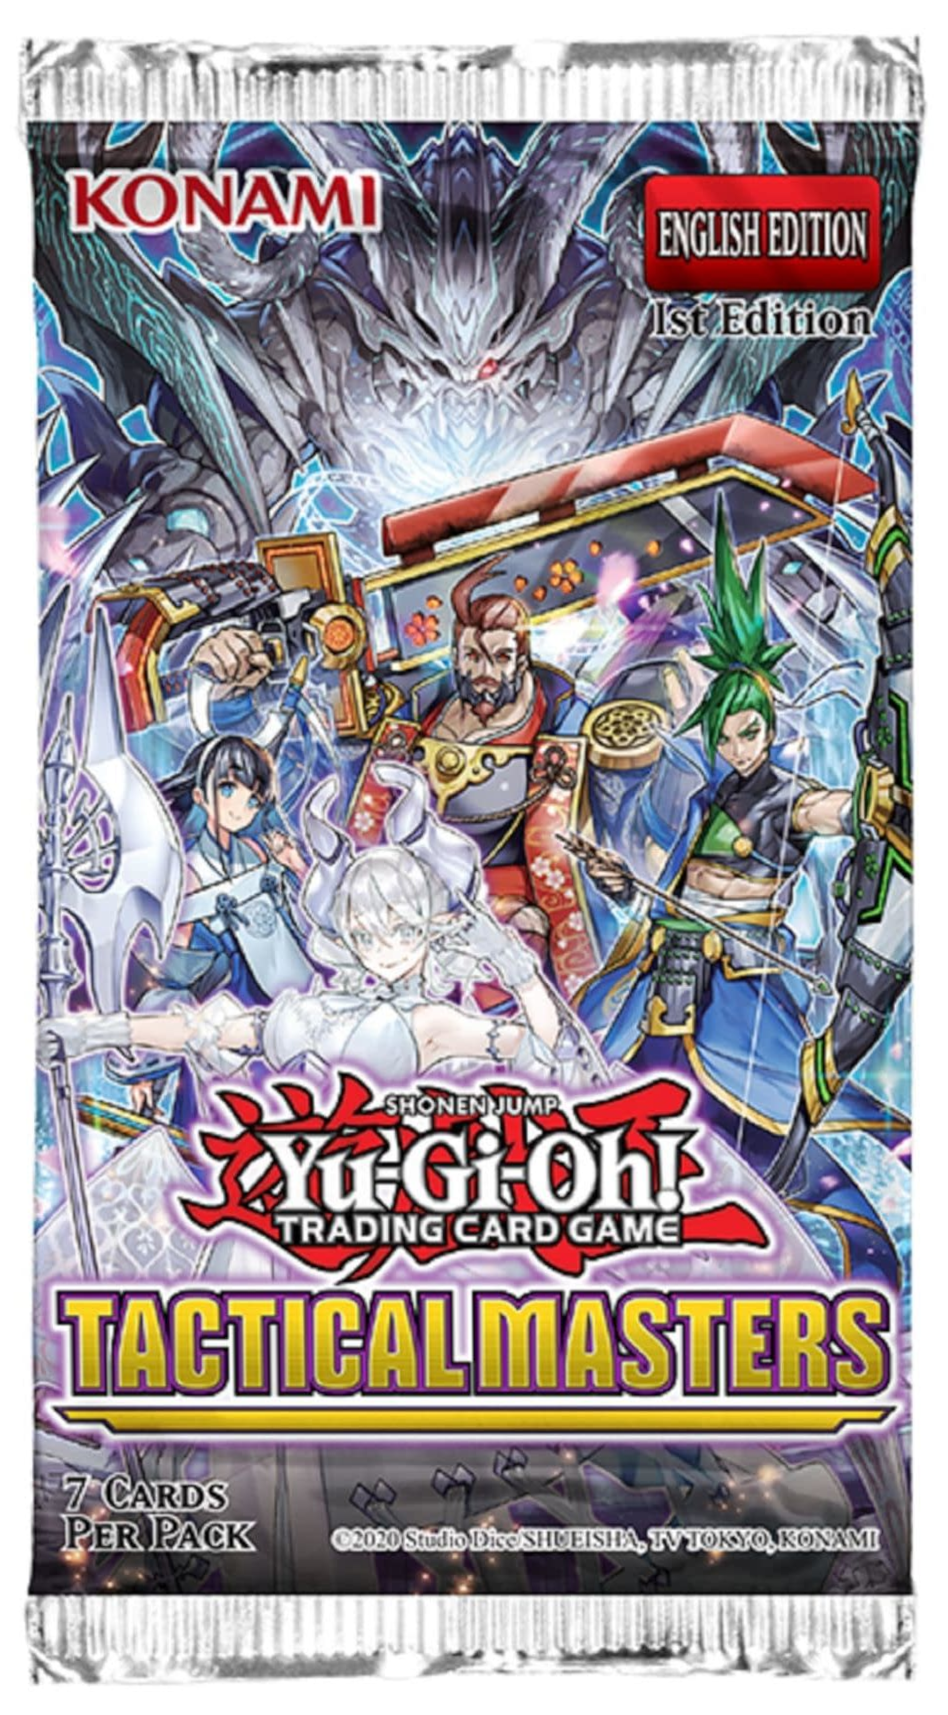 Tactical Masters - Booster Box (1st Edition) | Shuffle n Cut Hobbies & Games